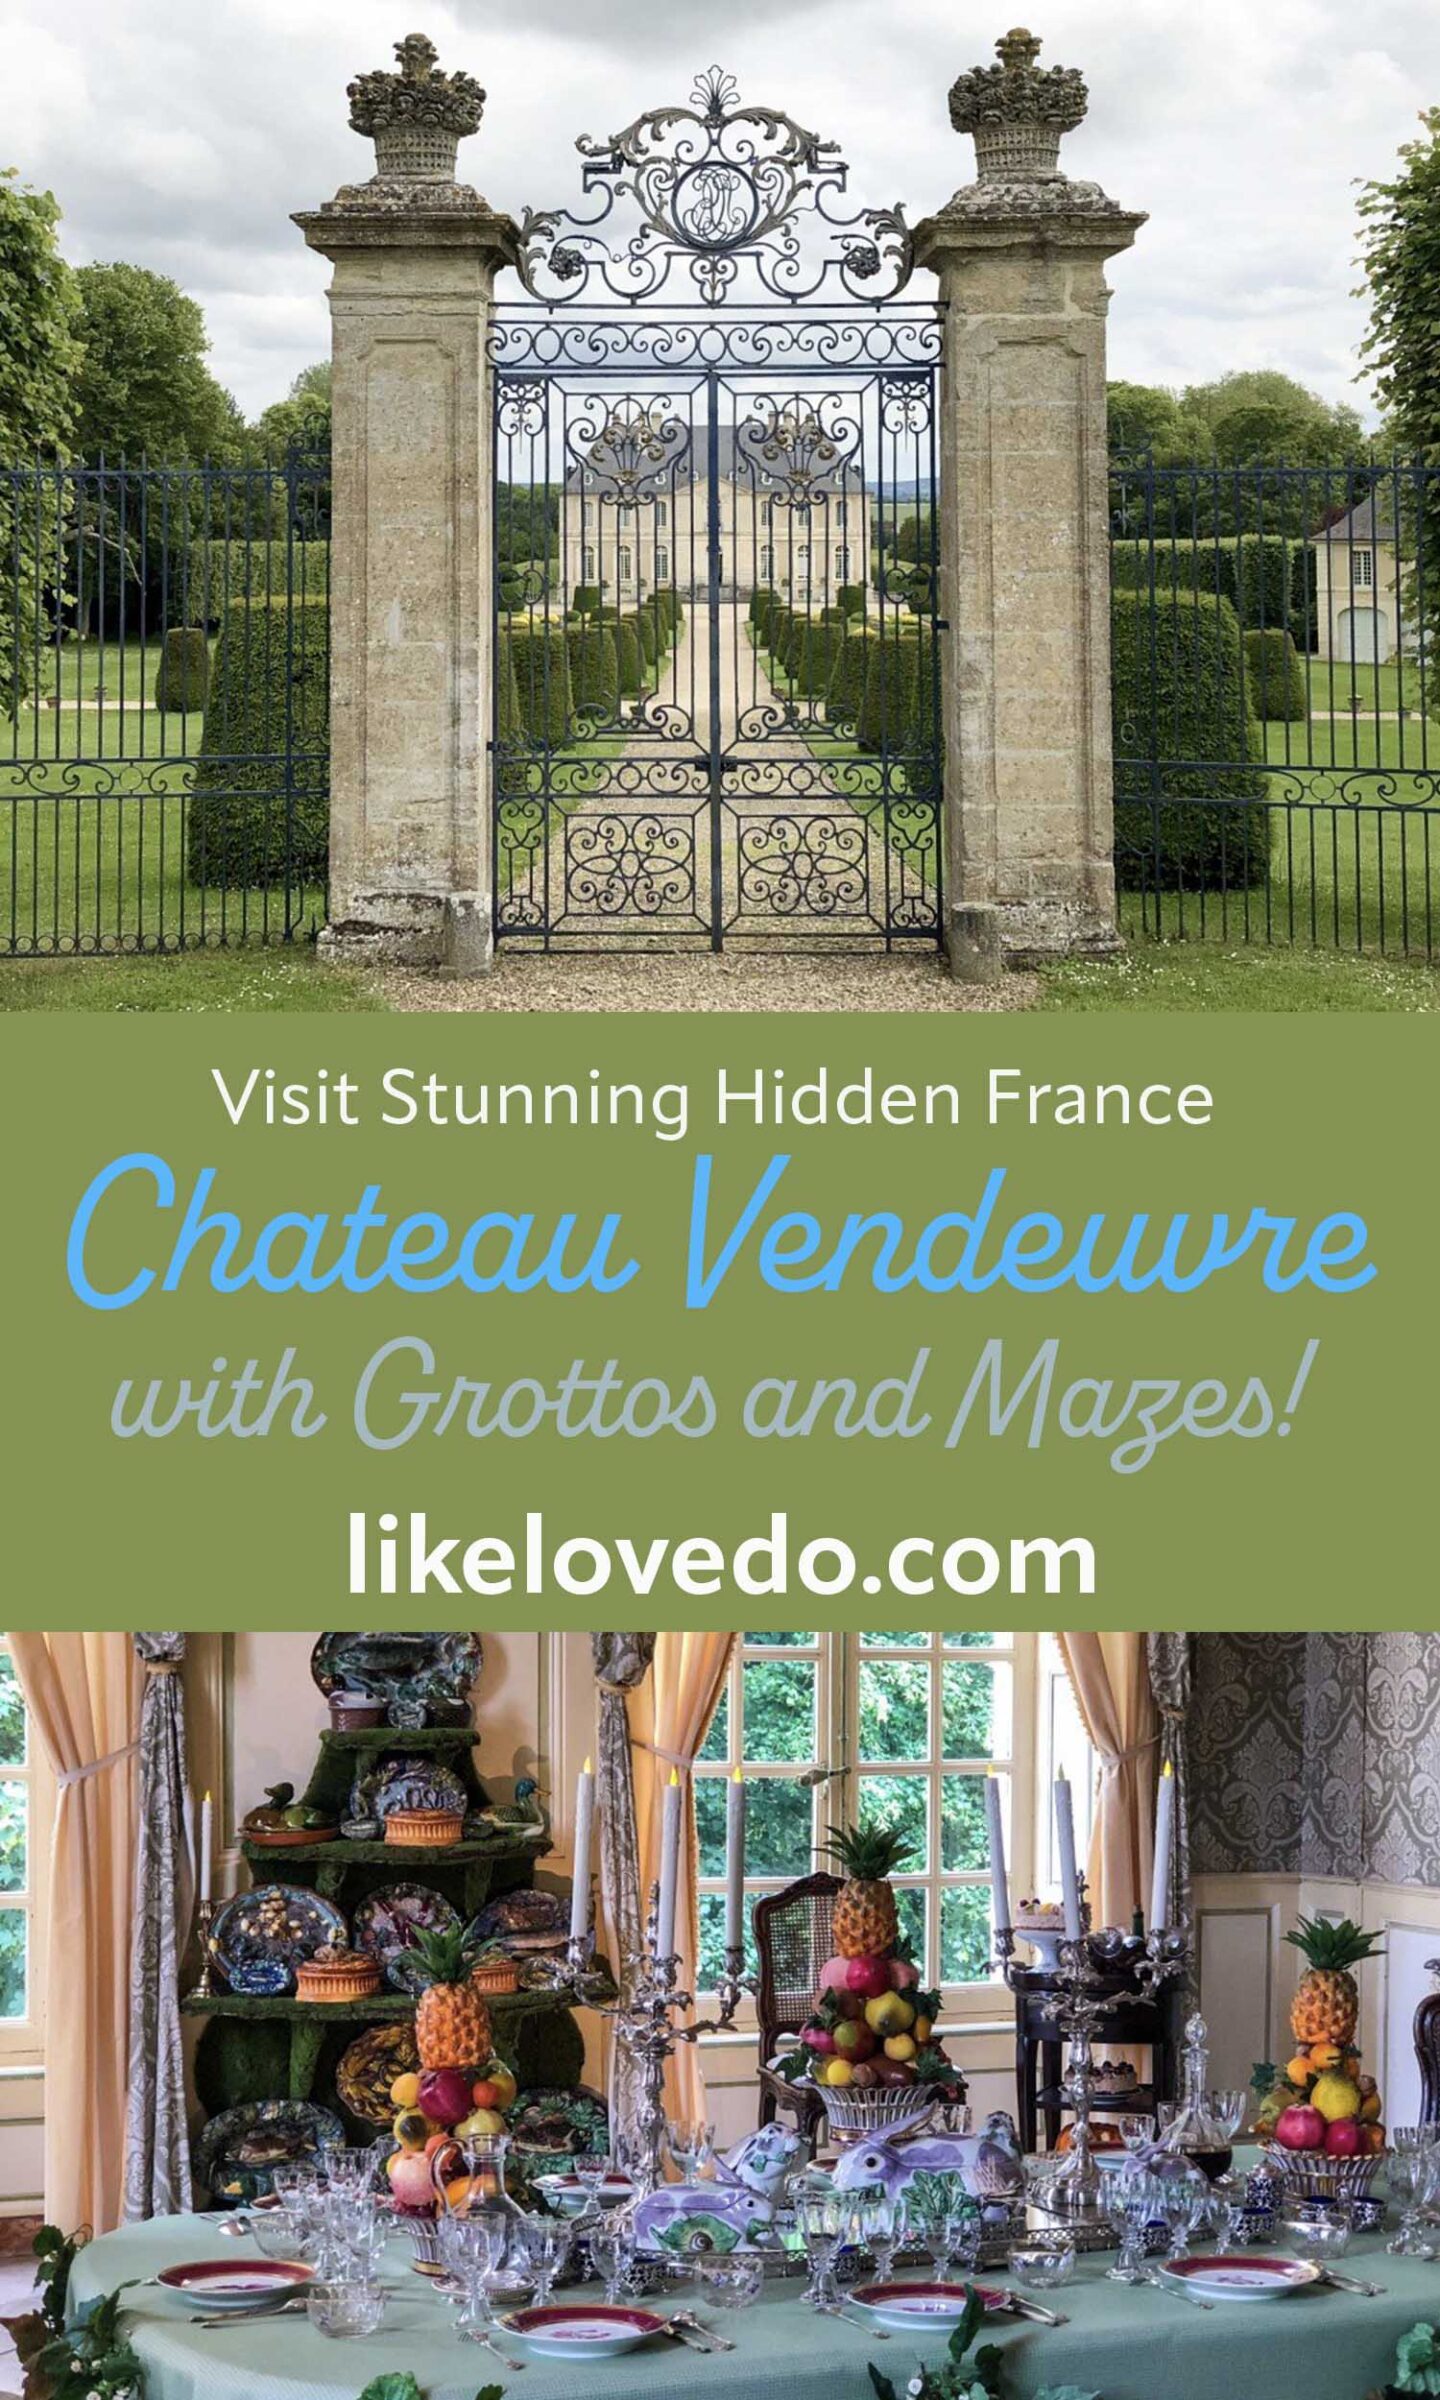 This is everthing you need to know about Chateau De Vendeuvre France in the Manche region of lower Normandy in the heart of Vendeuvre.